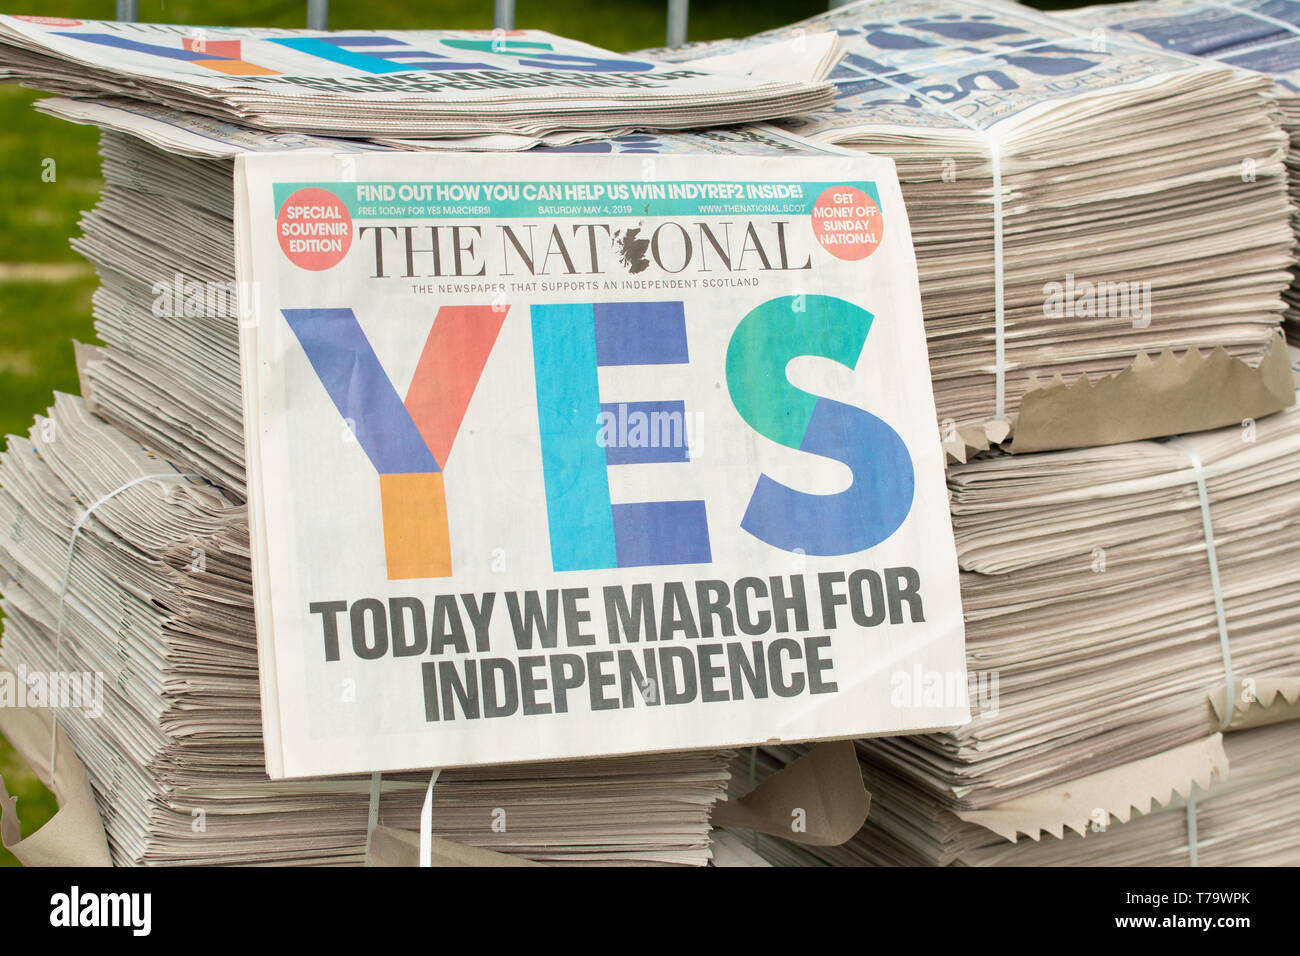 The National Newspaper at Independence Rally, Glasgow Green, Glasgow, Scotland, UK. 4th May, 2019 Stock Photo